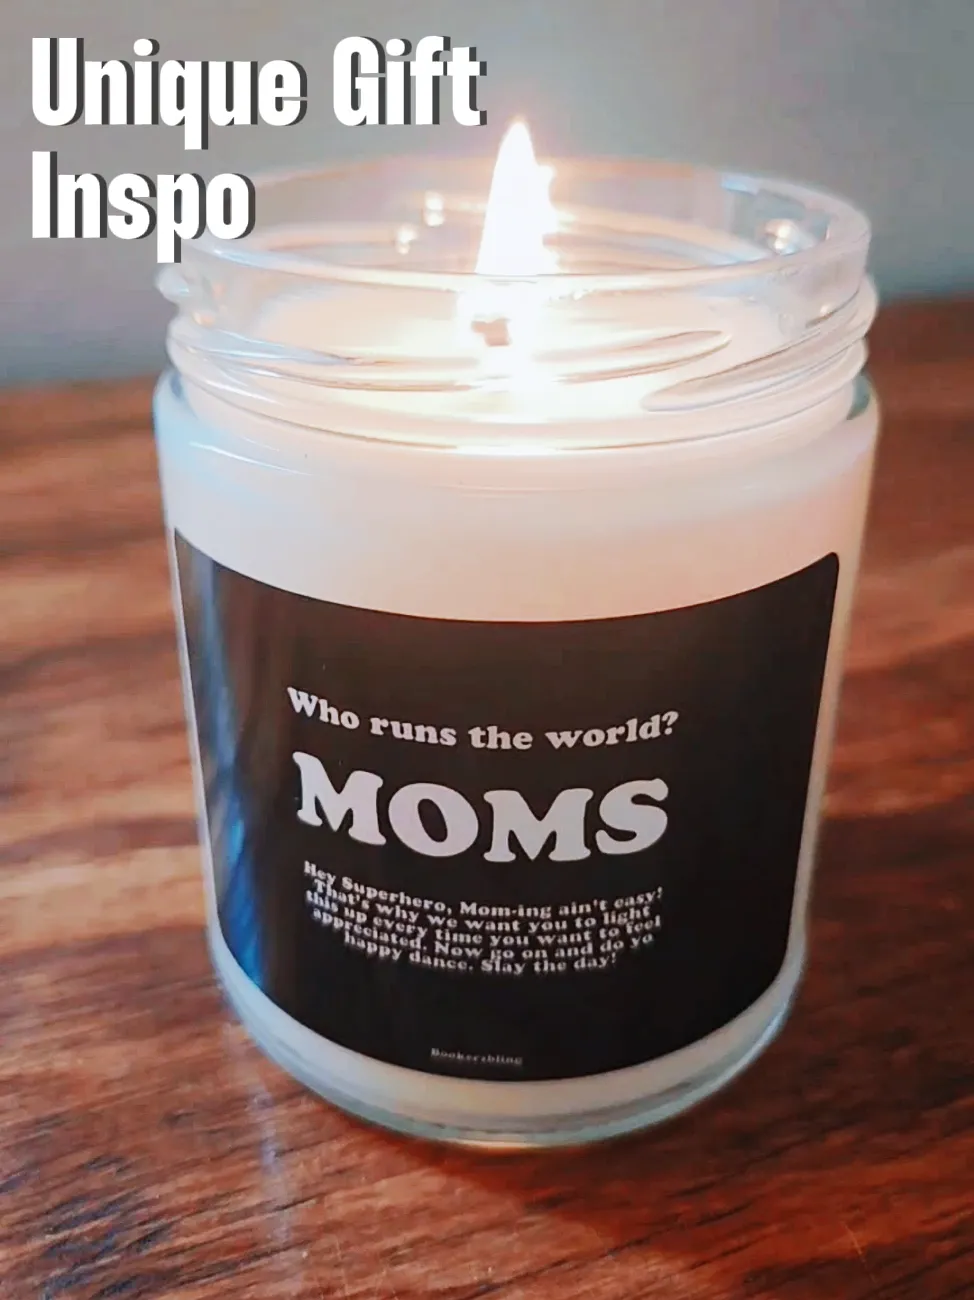 Cute gift ideas for moms. A scented soy candle